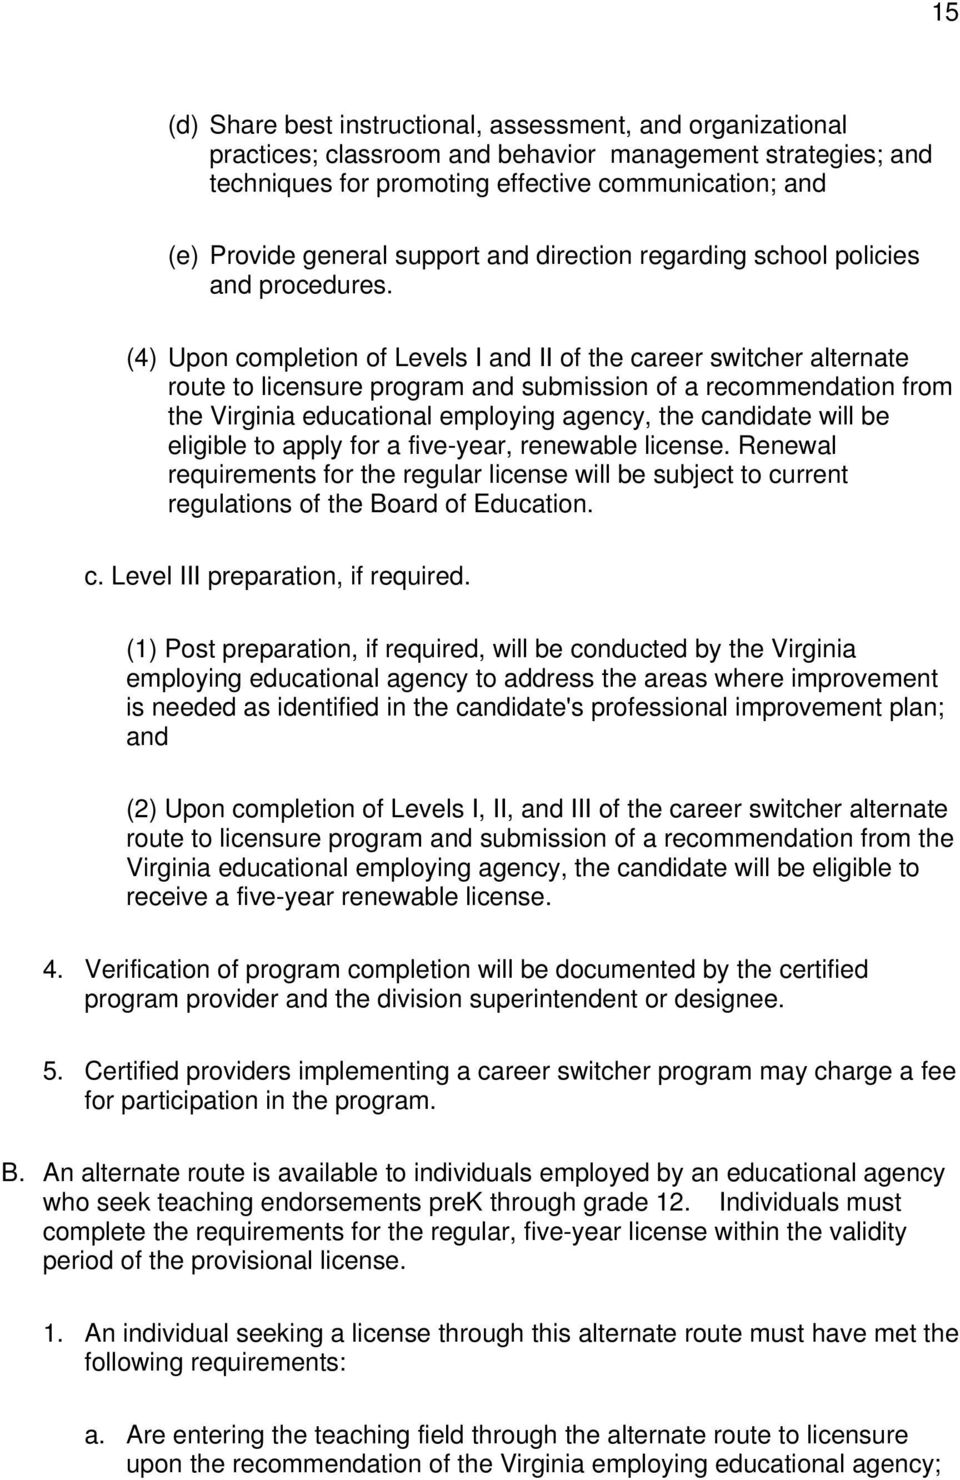 (4) Upon completion of Levels I and II of the career switcher alternate route to licensure program and submission of a recommendation from the Virginia educational employing agency, the candidate